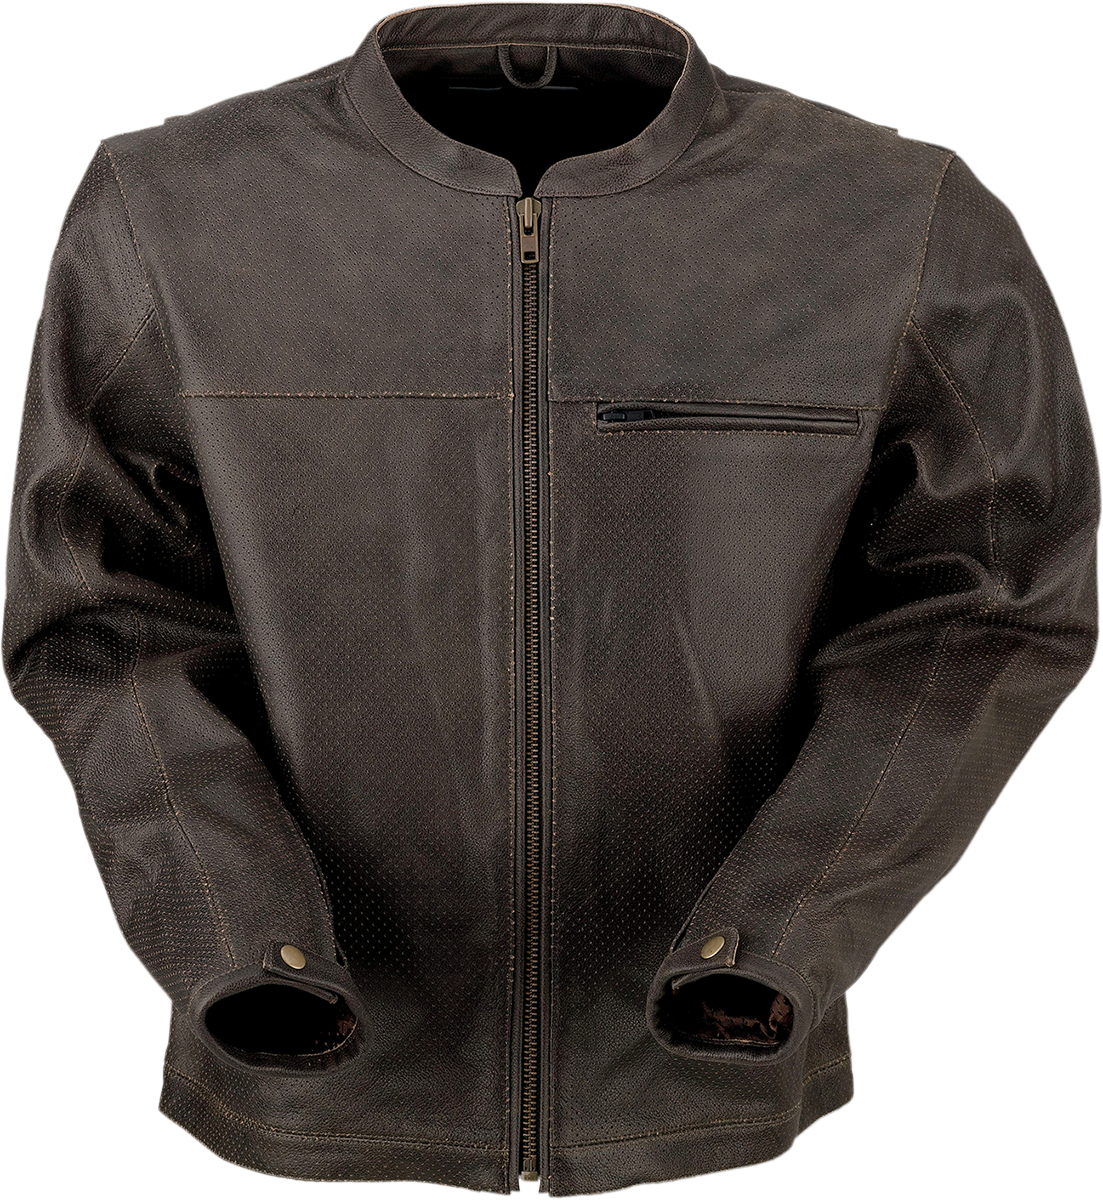 Z1R Munition Perforated Leather Jacket - Brown - Large 2810-3806